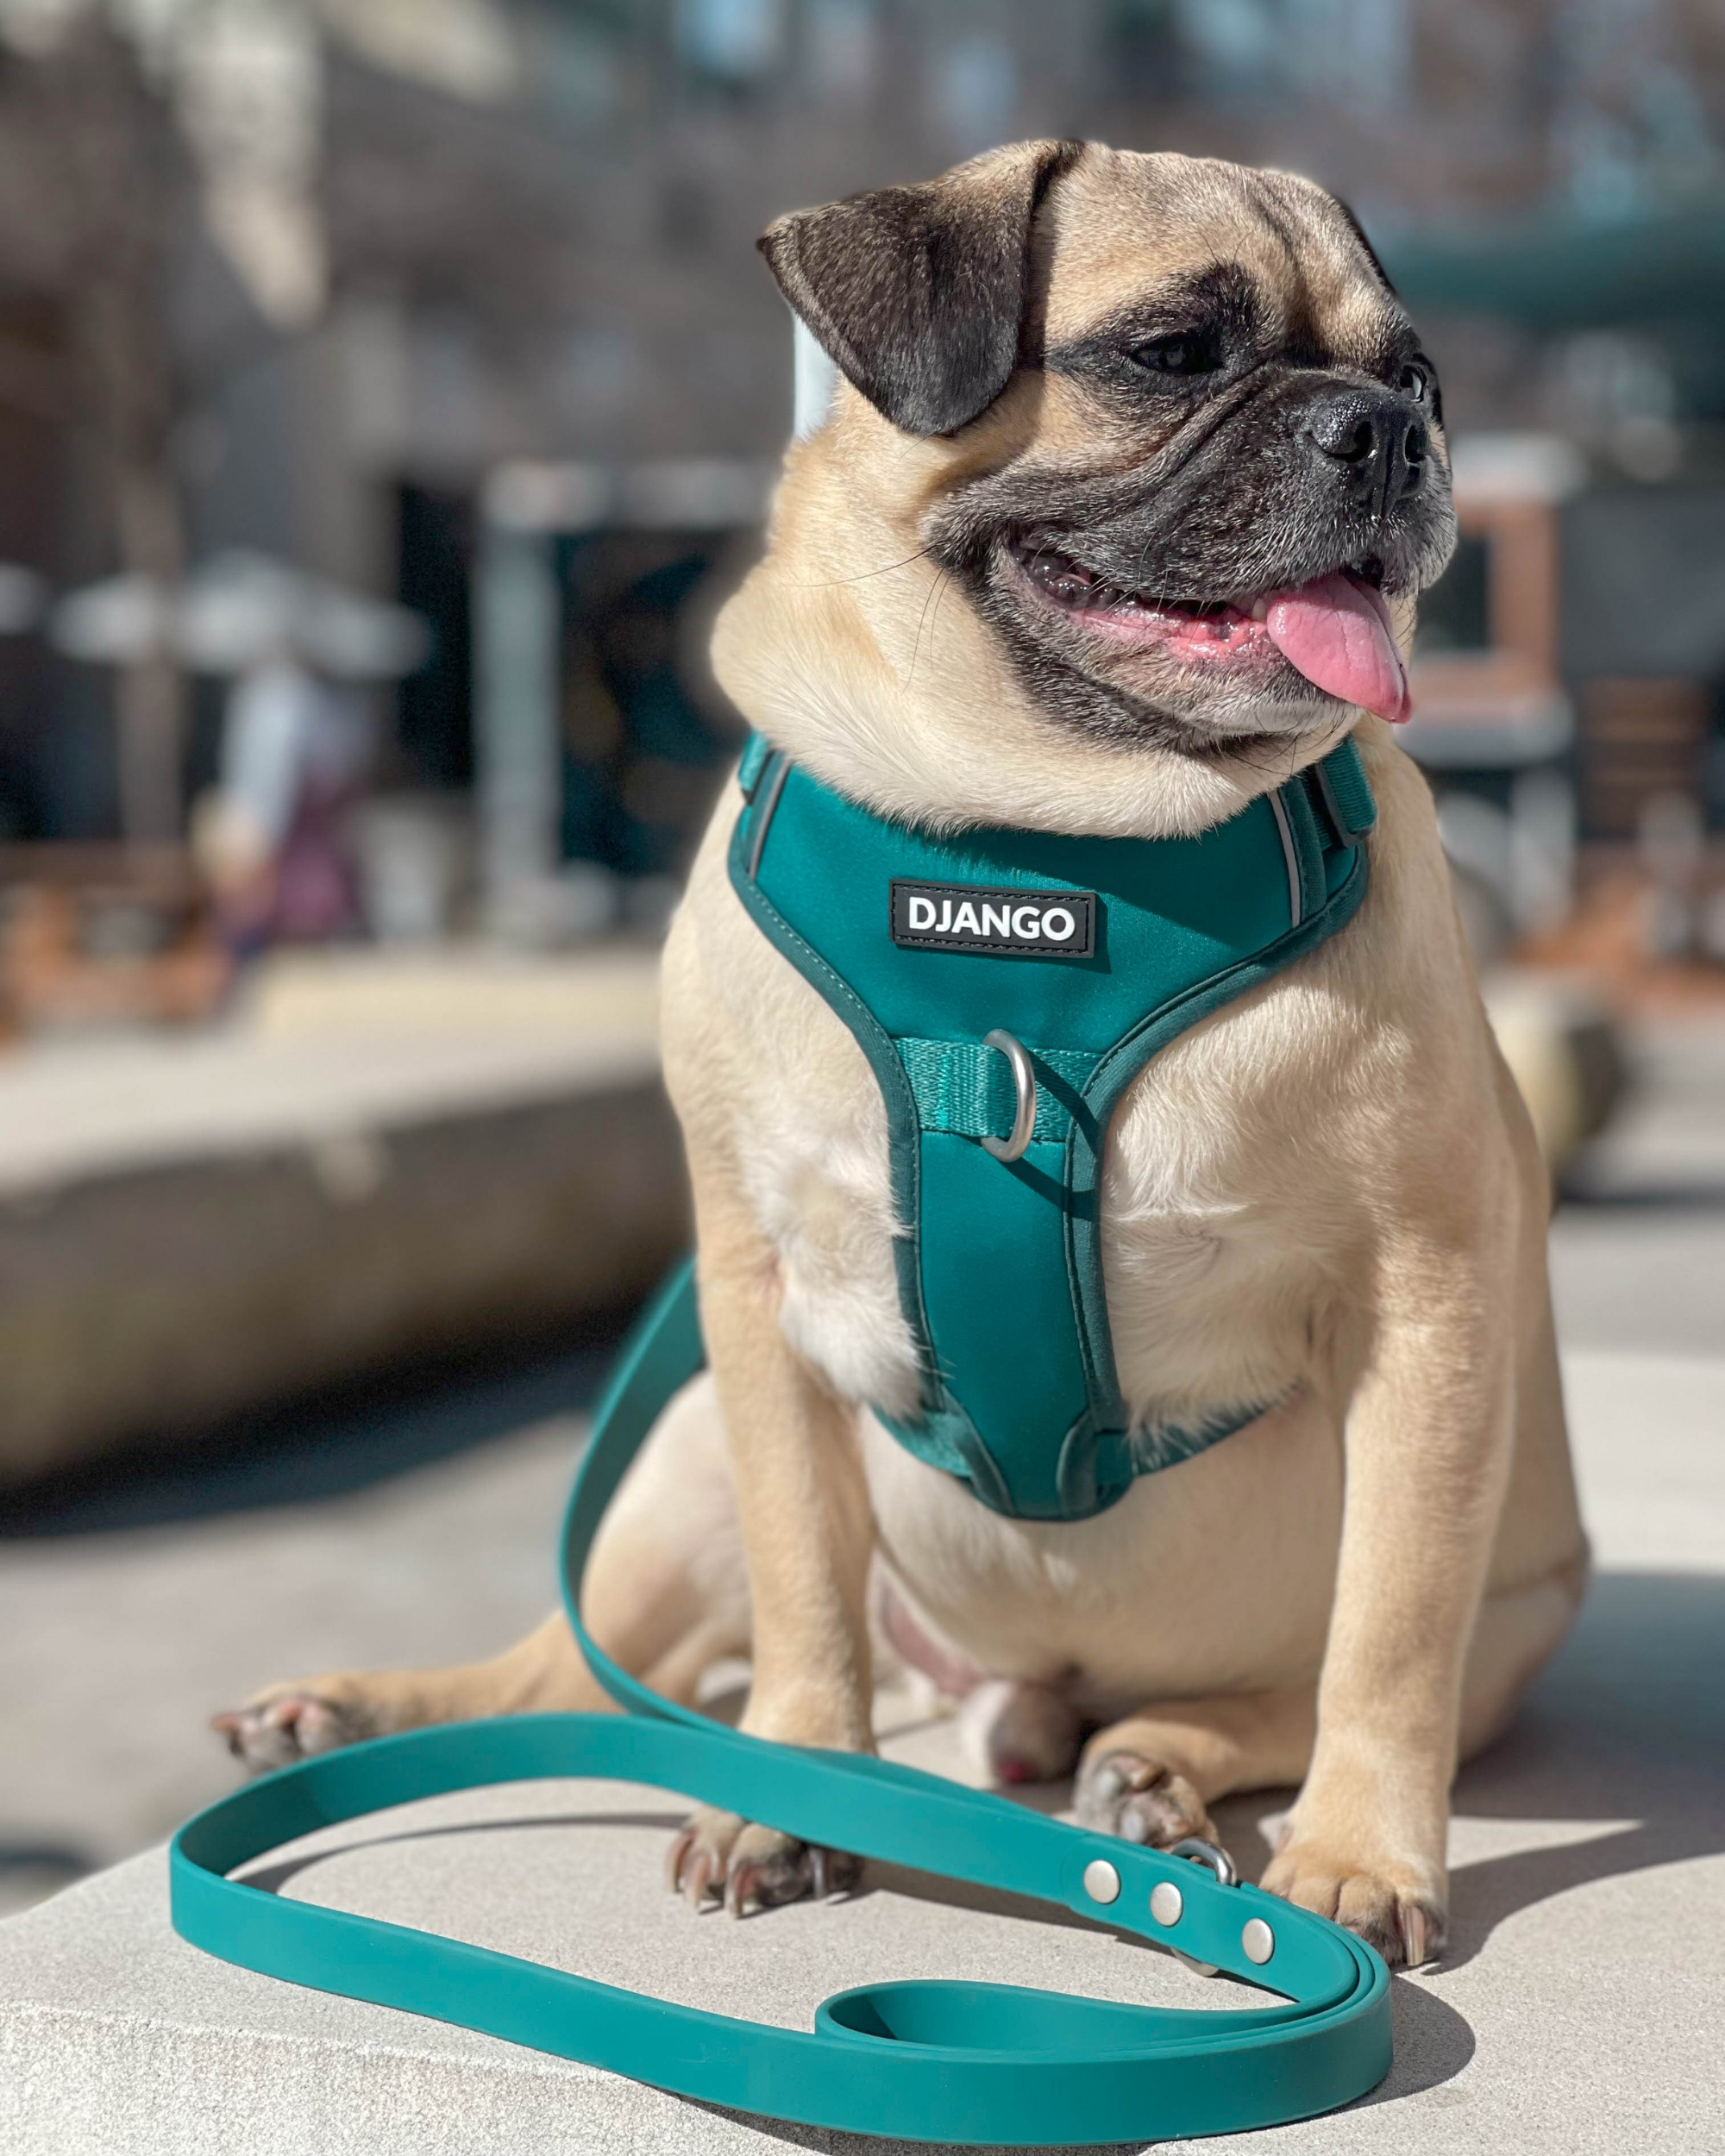 Adorable pug Rumi from Texas is wearing his DJANGO no pull dog harness and matching leash set in color Dark Teal Green. A percentage of every Tahoe Collection order goes directly to environmentally-friendly non-profit Tahoe Fund to help protect Lake Tahoe and its surrounding wild places - djangobrand.com